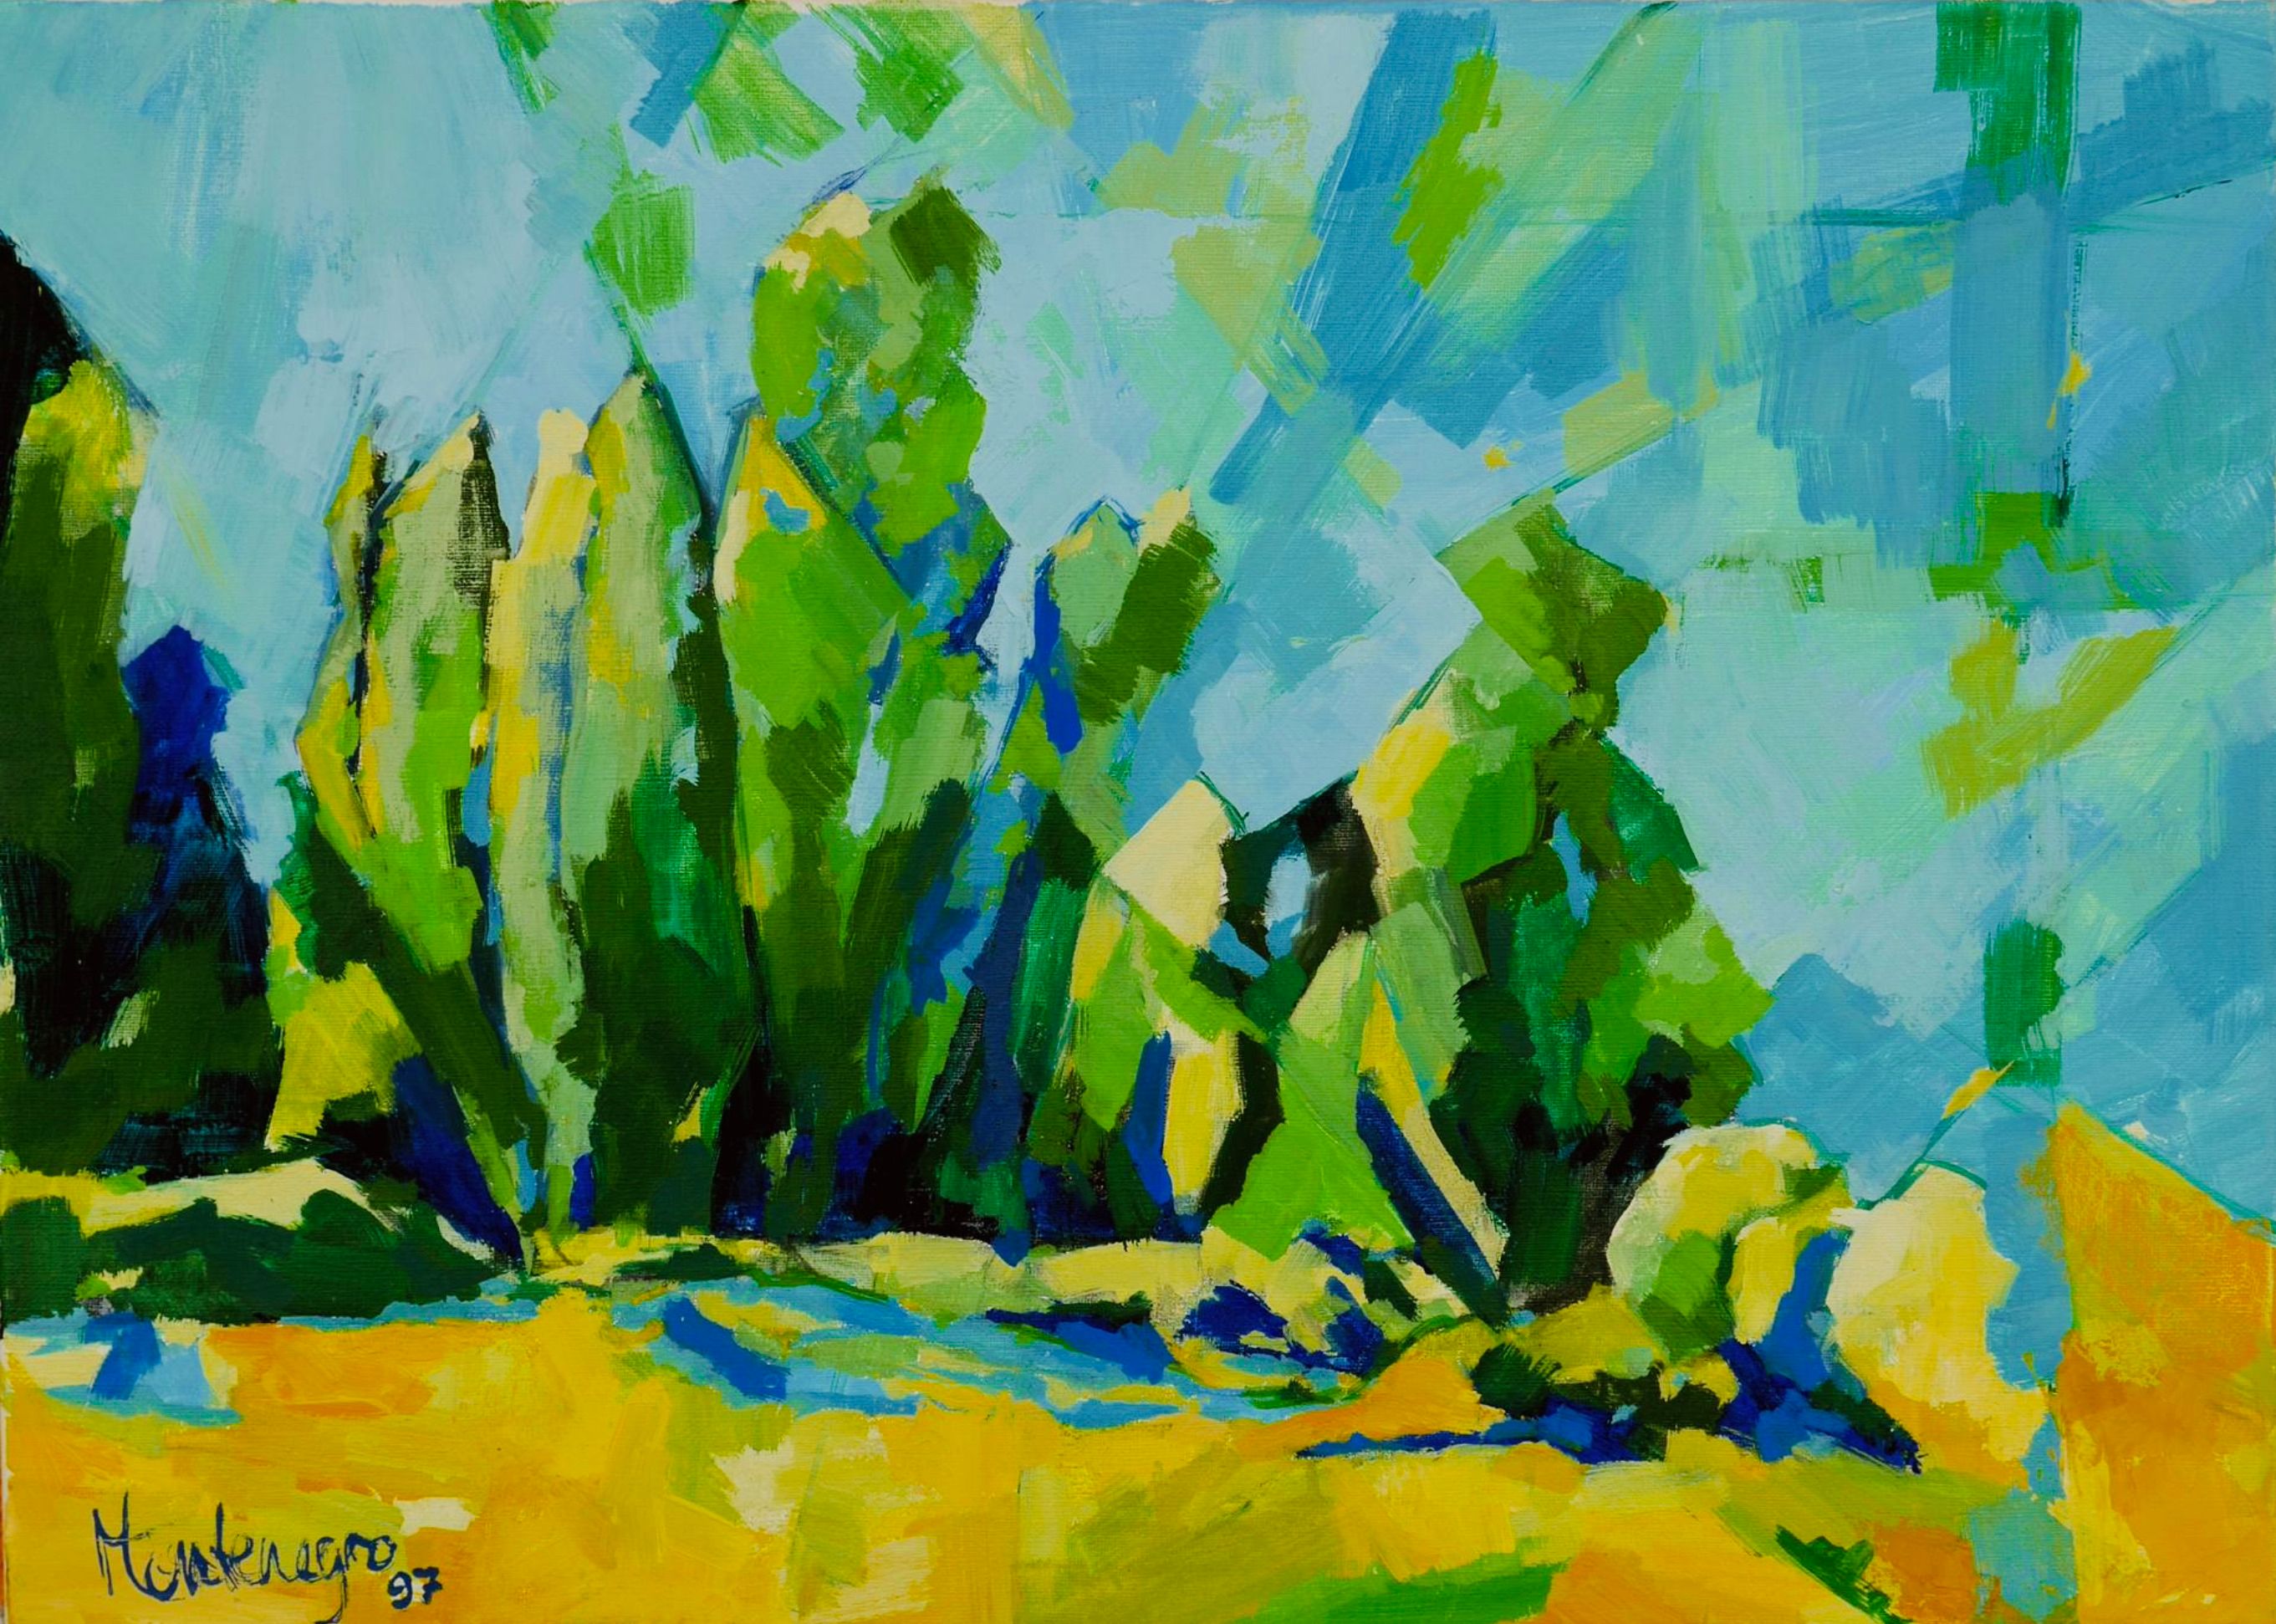 Miriam Montenegro Expressionist Painting Landscape with Green Plants